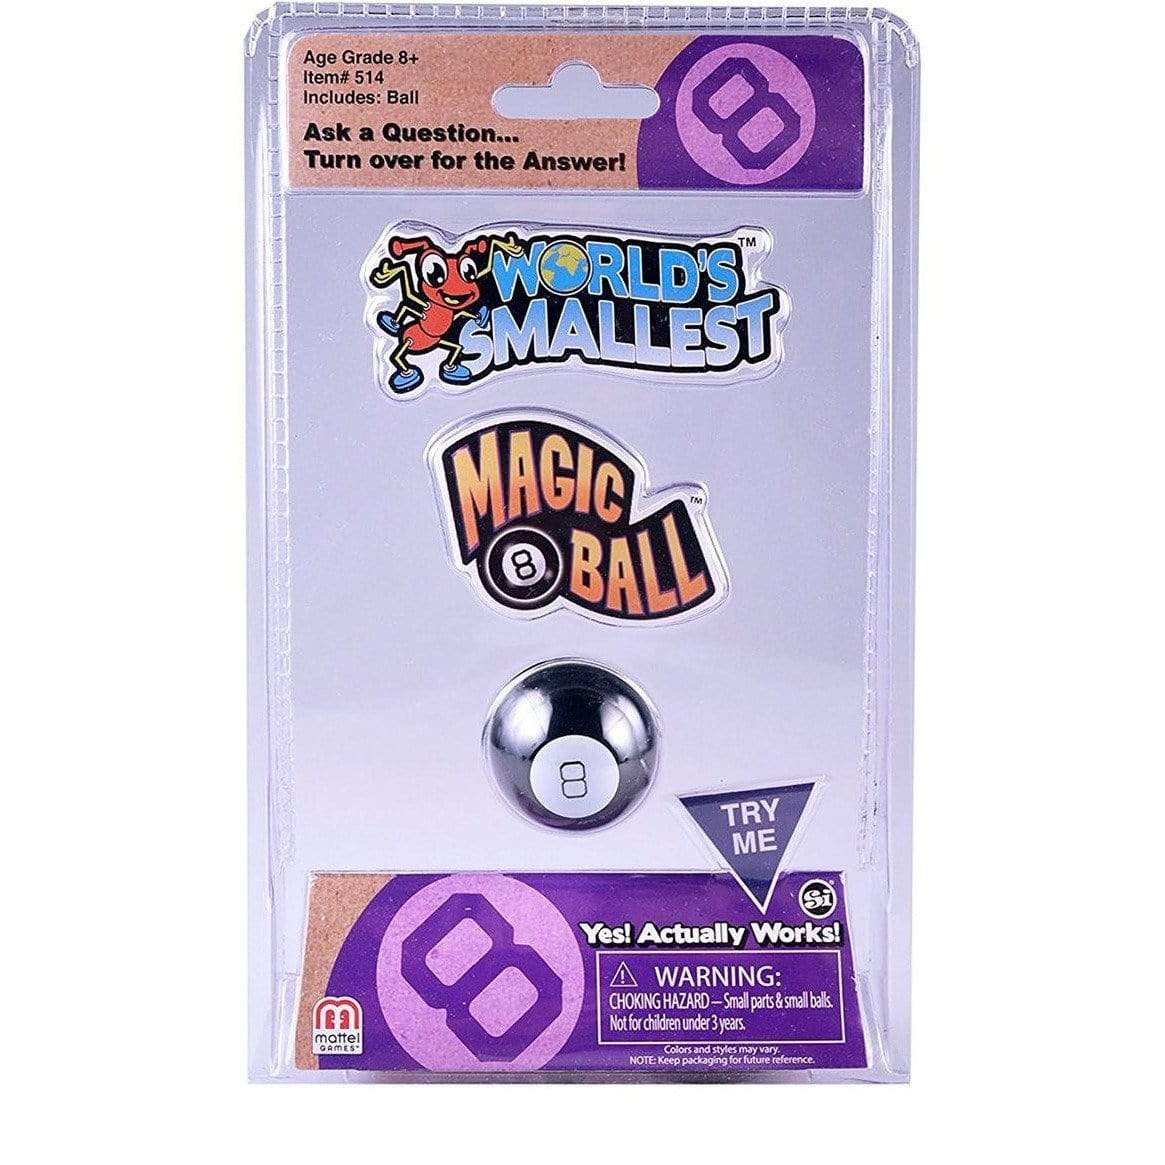 World's Smallest: Magic 8 Ball Super Impulse Puzzles/Playthings